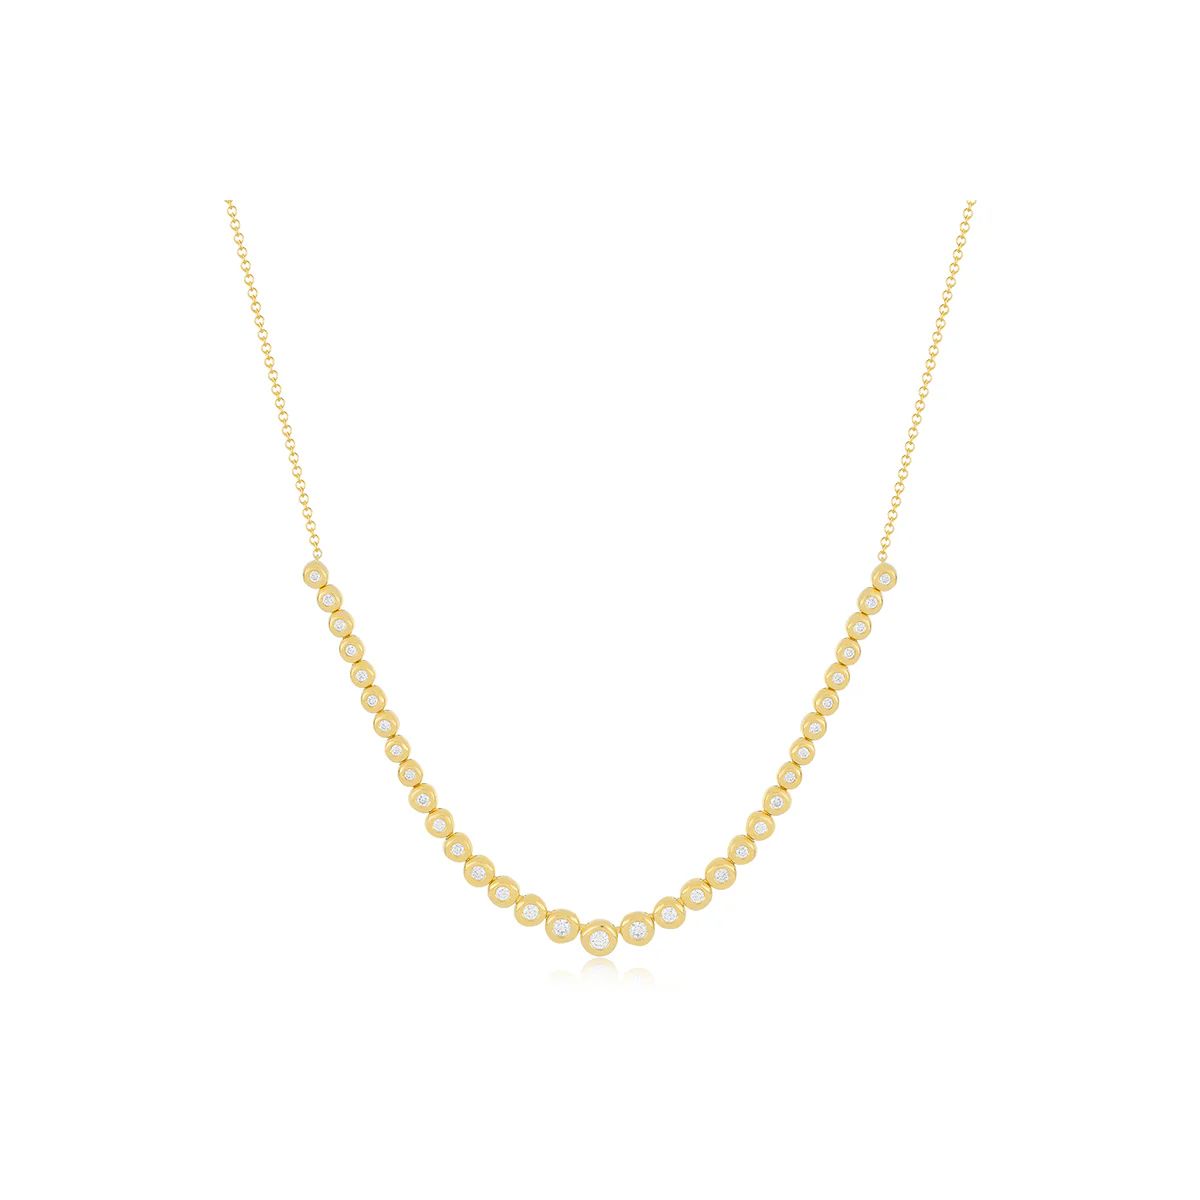 Graduated Diamond Pillow Necklace | EF Collection